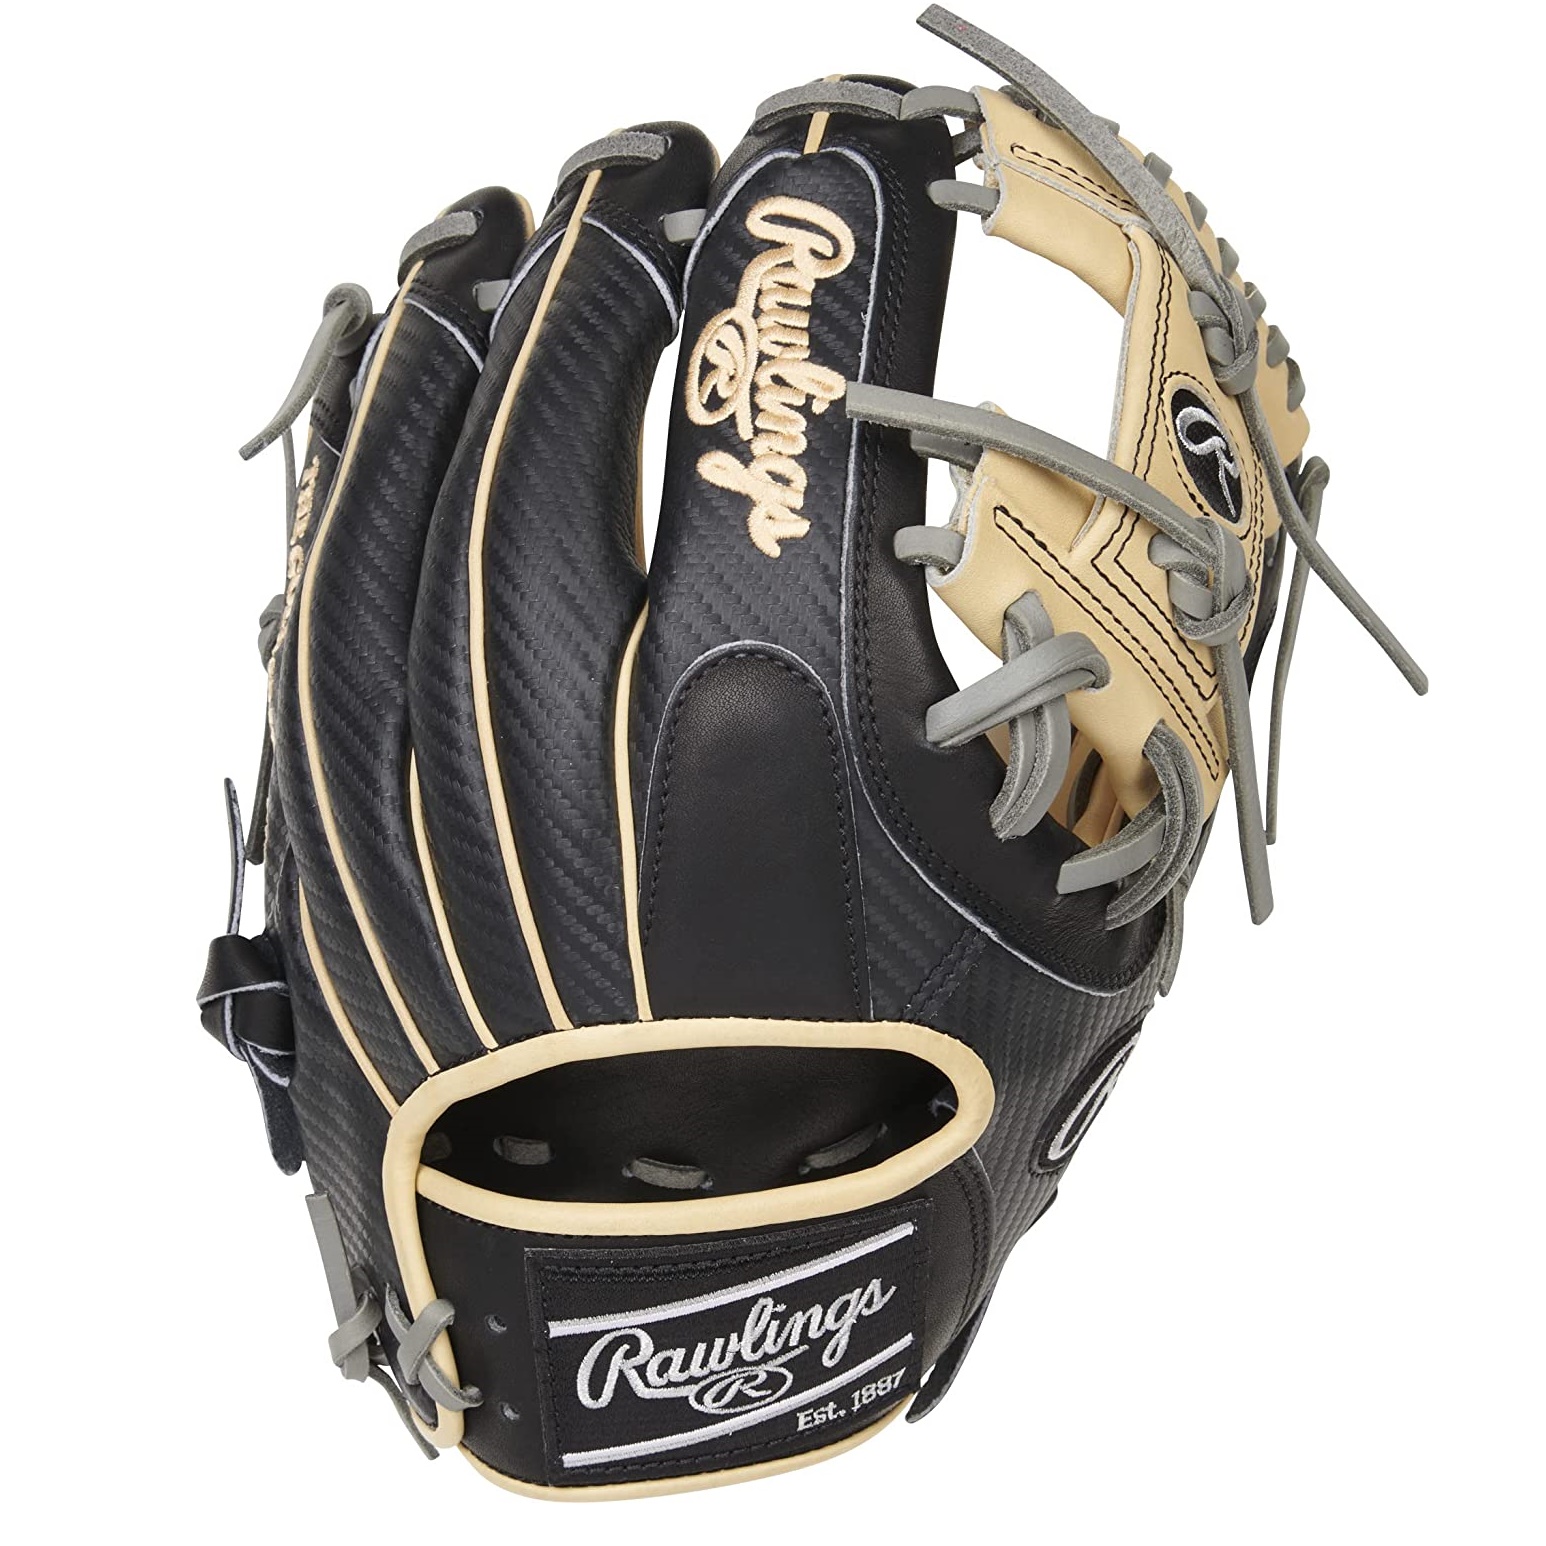 rawlings-heart-of-the-hide-11-5-inch-baseball-glove-pro-i-web-right-hand-throw-1 PRO204-2CBCF-RightHandThrow Rawlings  <p>Constructed from Rawlings world-renowned Heart of the Hide steer leather.</p> <p>Taken